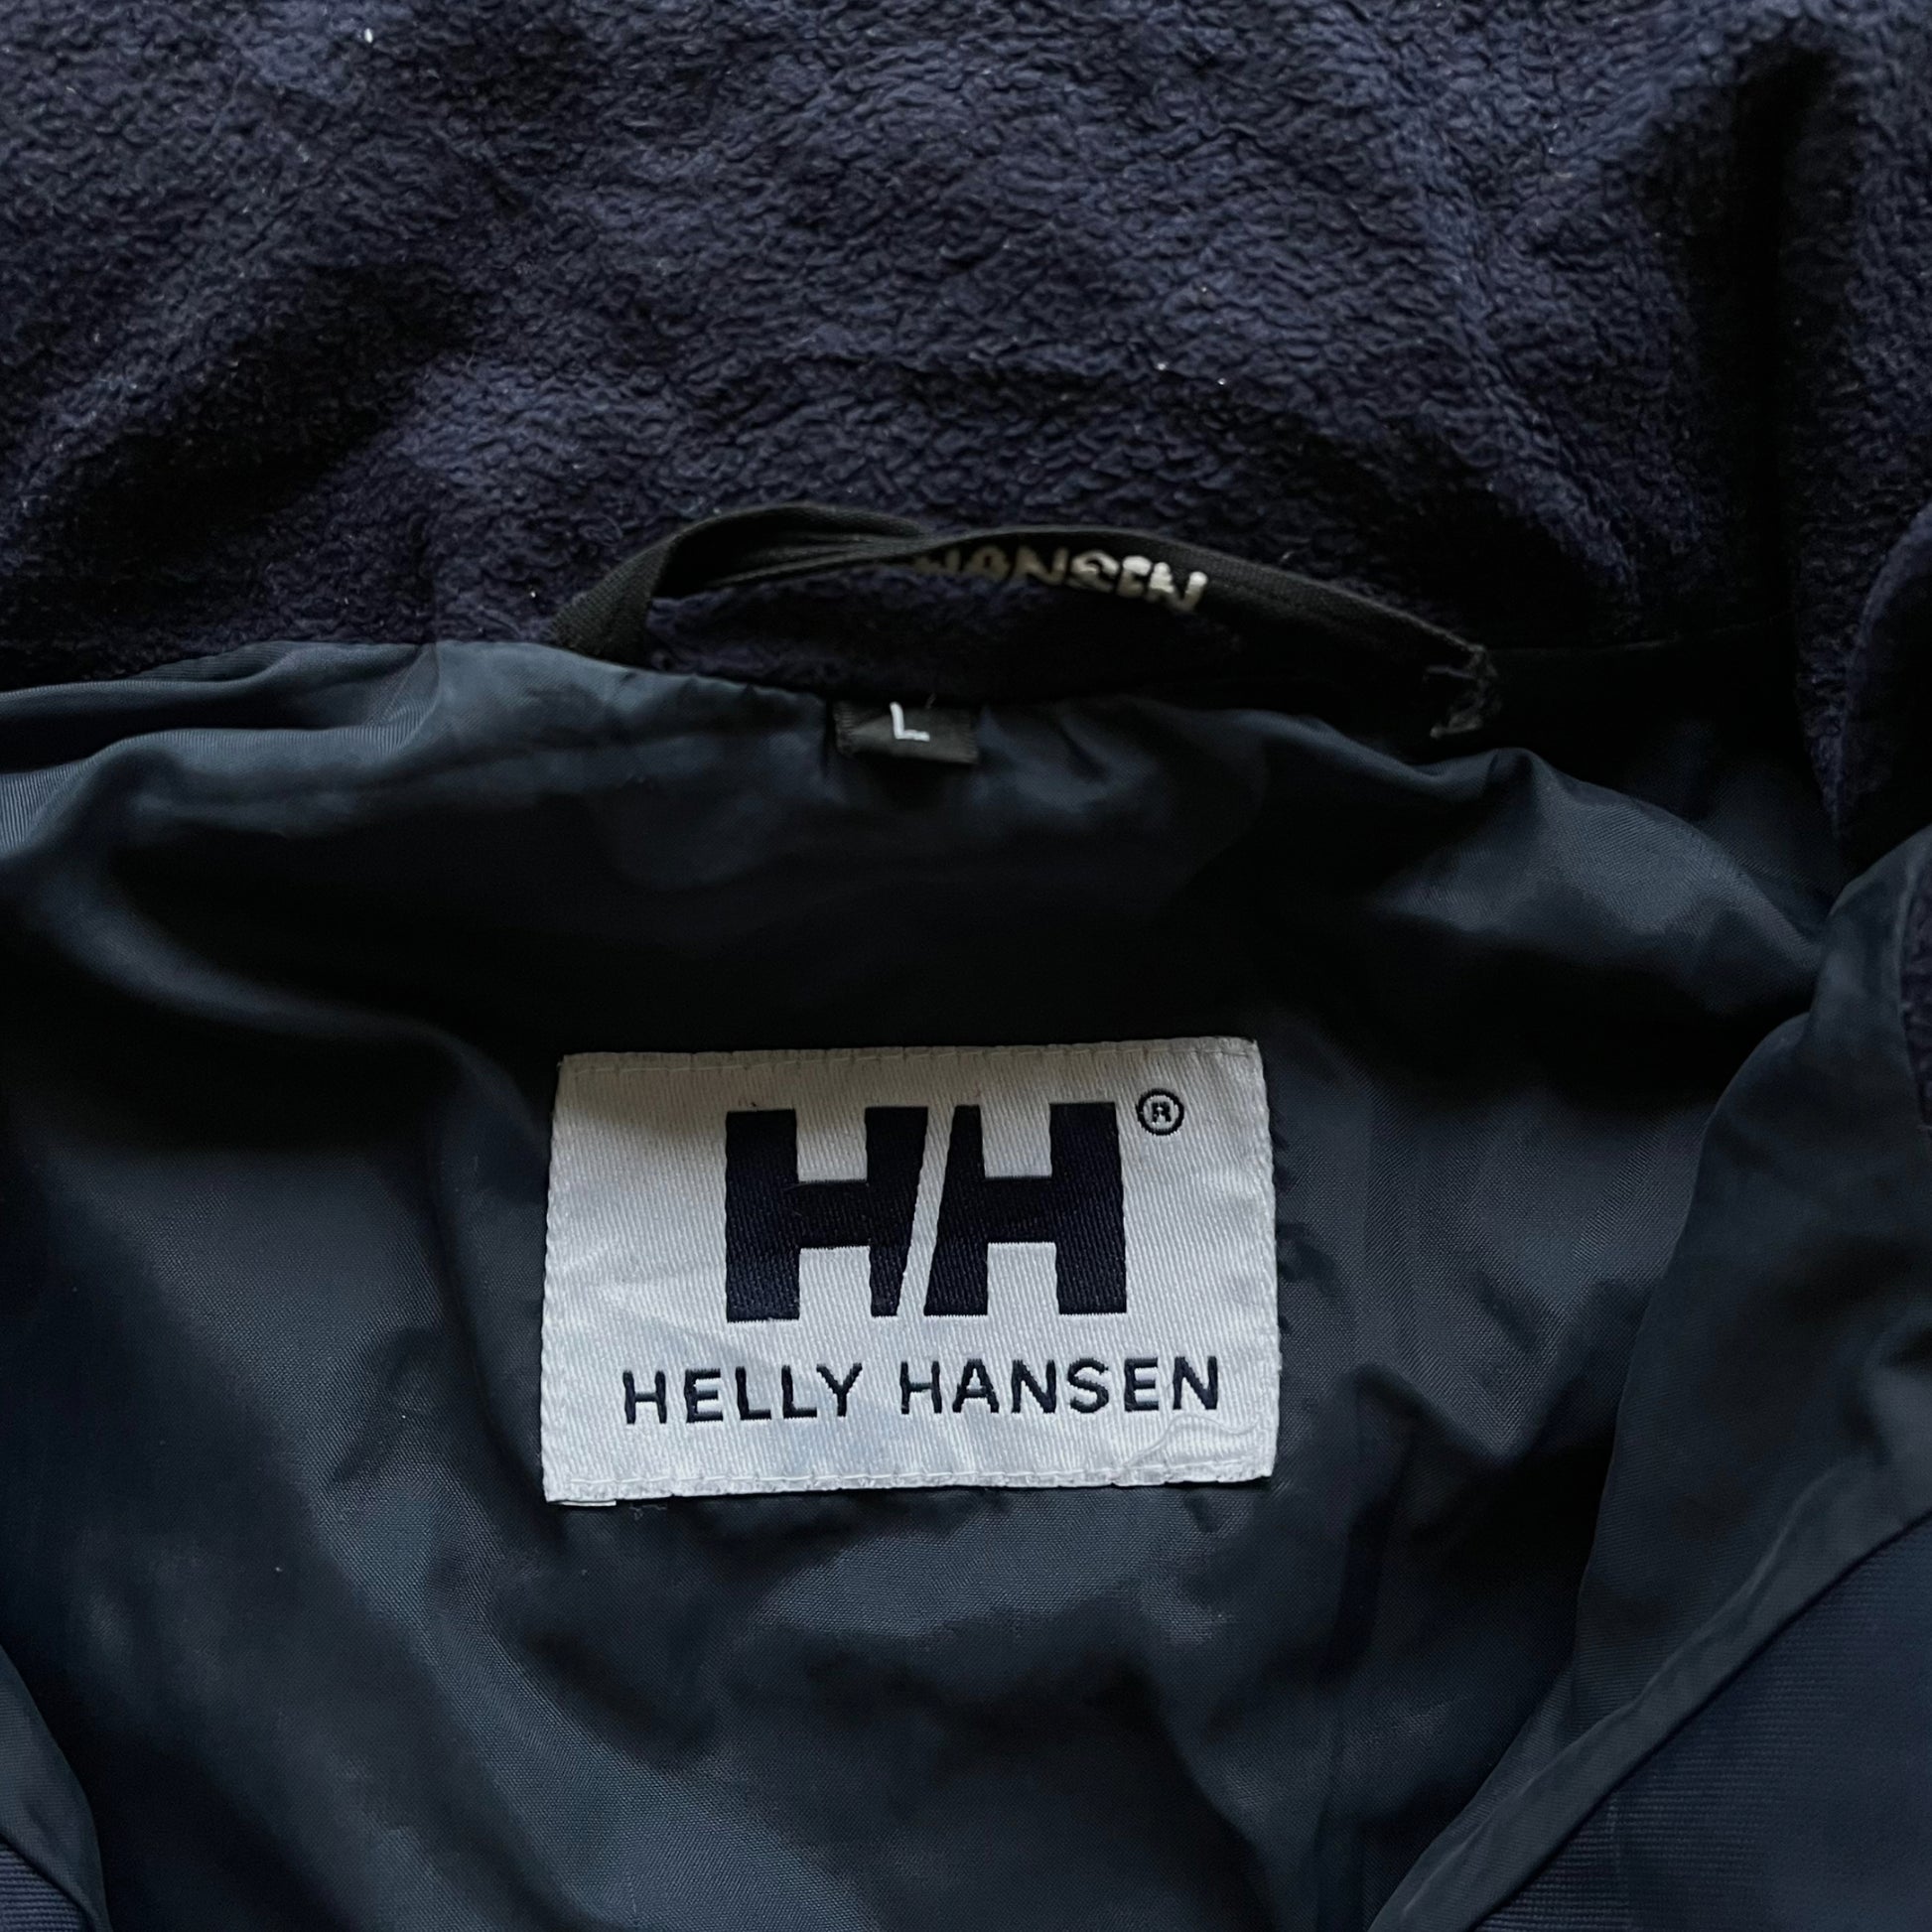 Vintage 90s Helly Hansen Yellow Sailing Jacket With Fold Away Hood Label - Casspios Dream